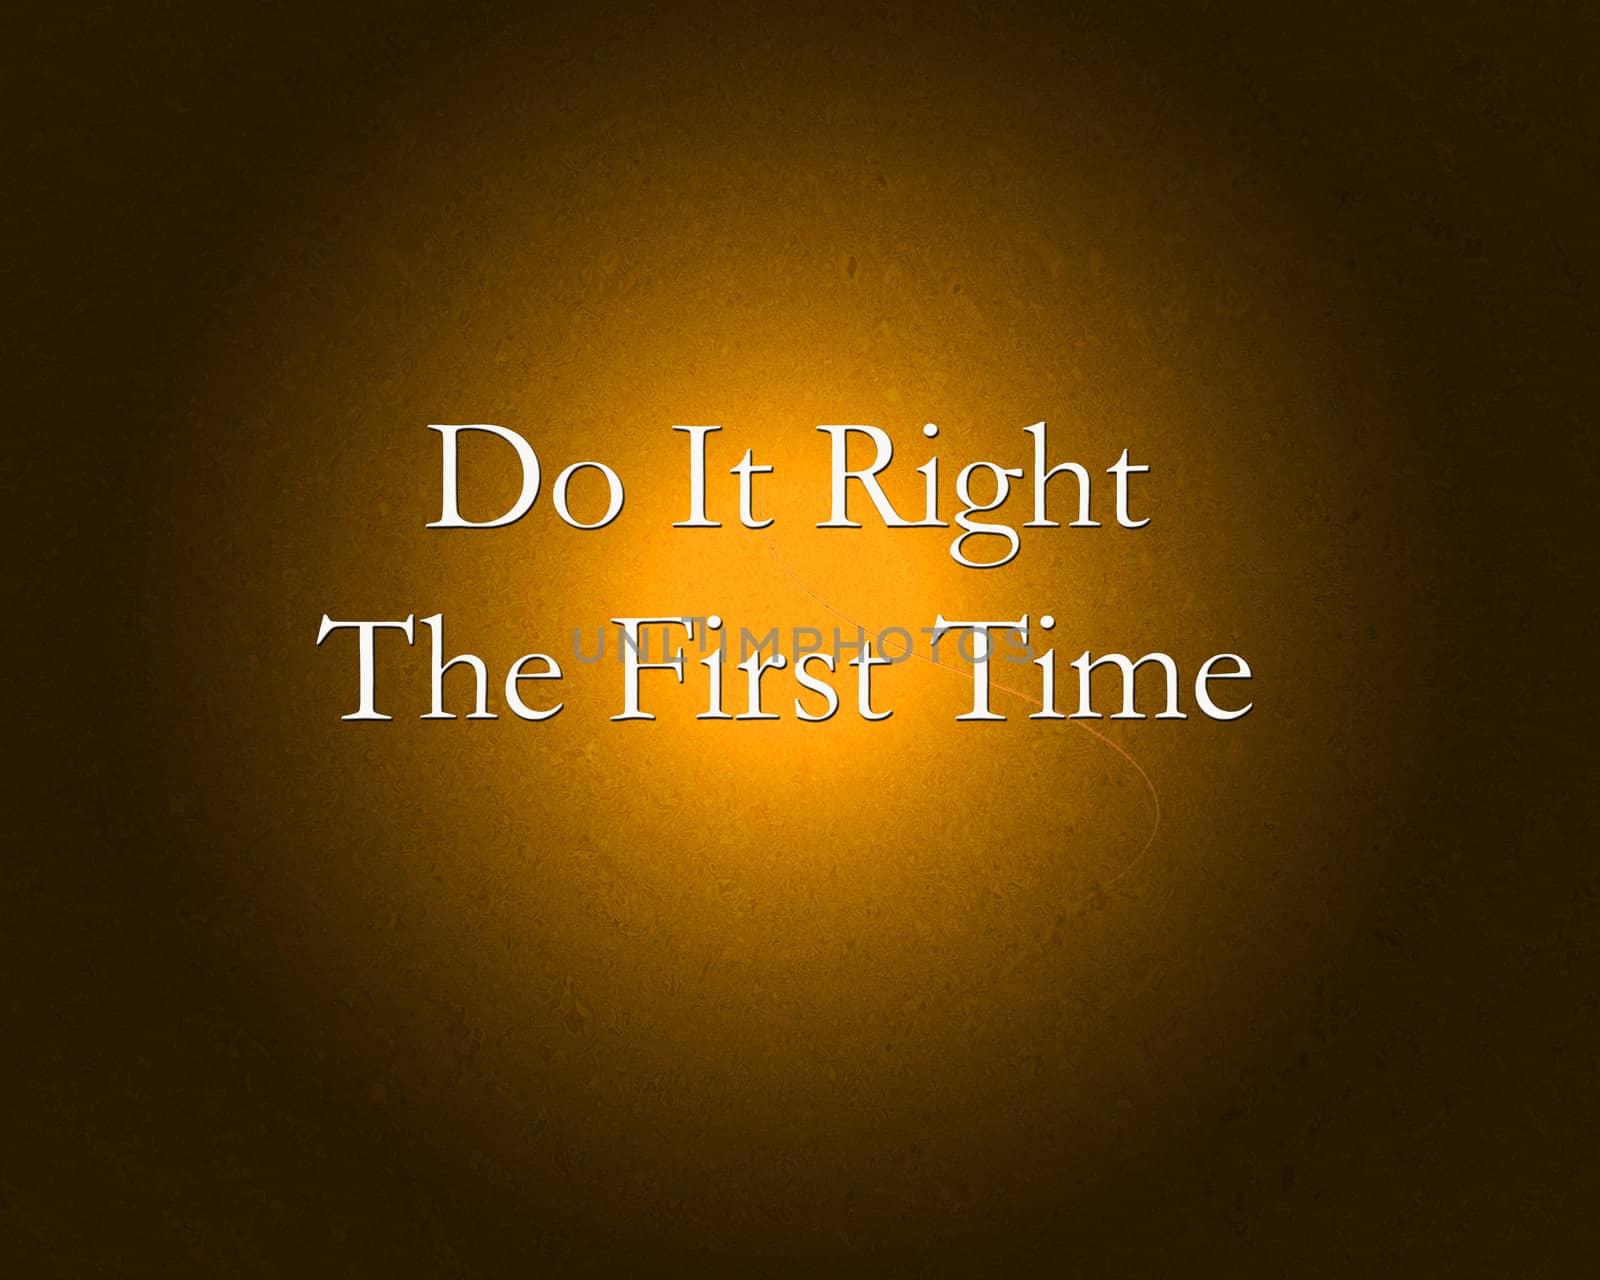 Do it right the first time by sacatani